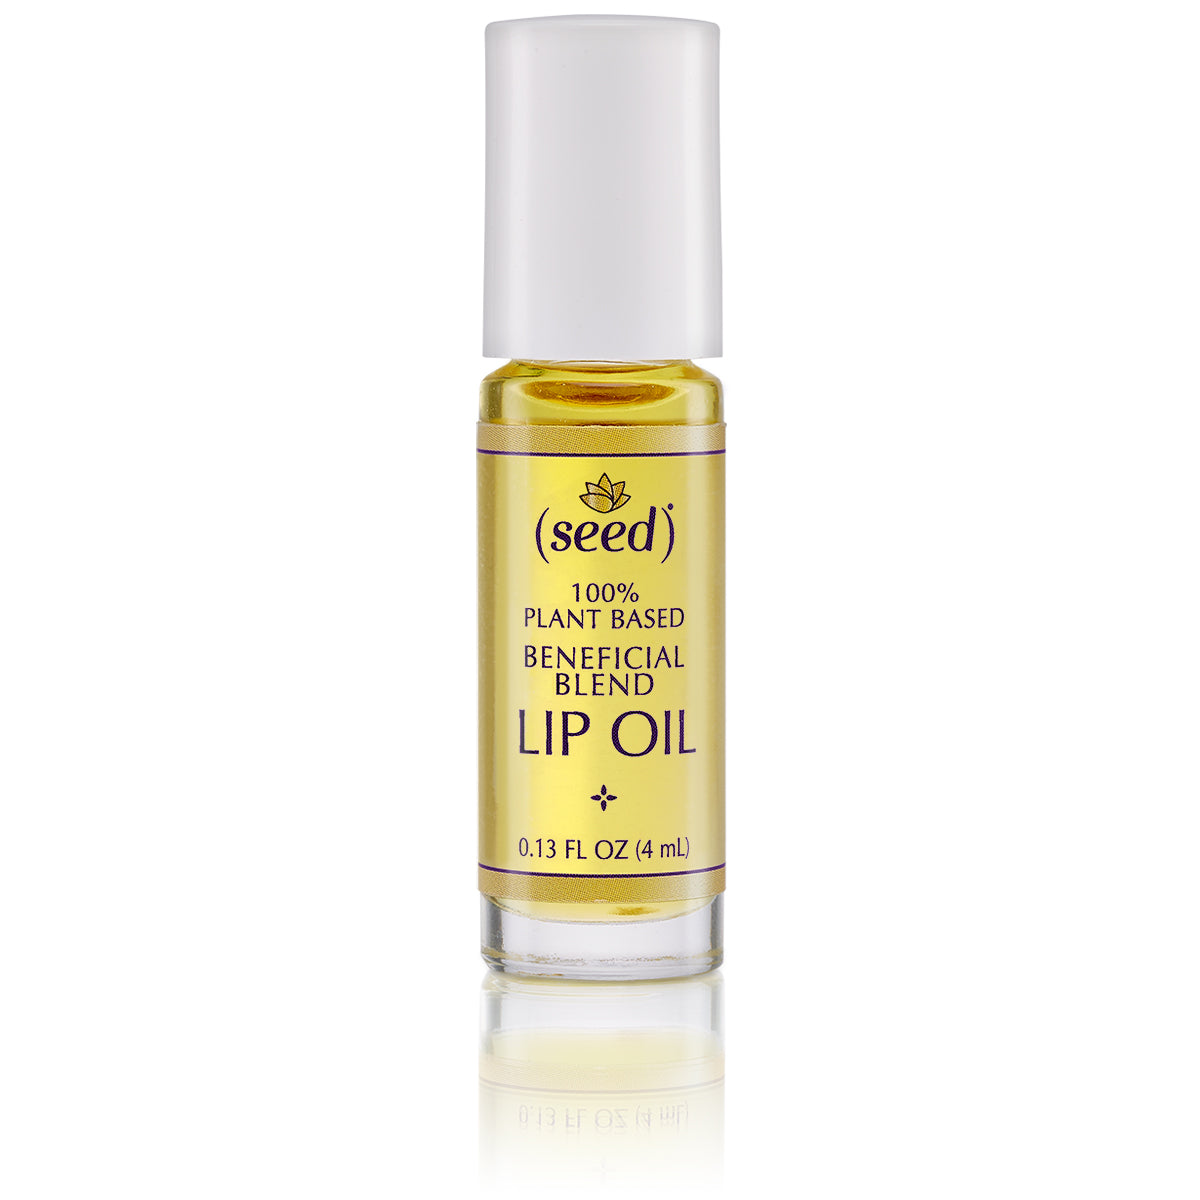 Seed Stress Relief Blend Lip Oil with lavender, patchouli, and clary sage essential oils